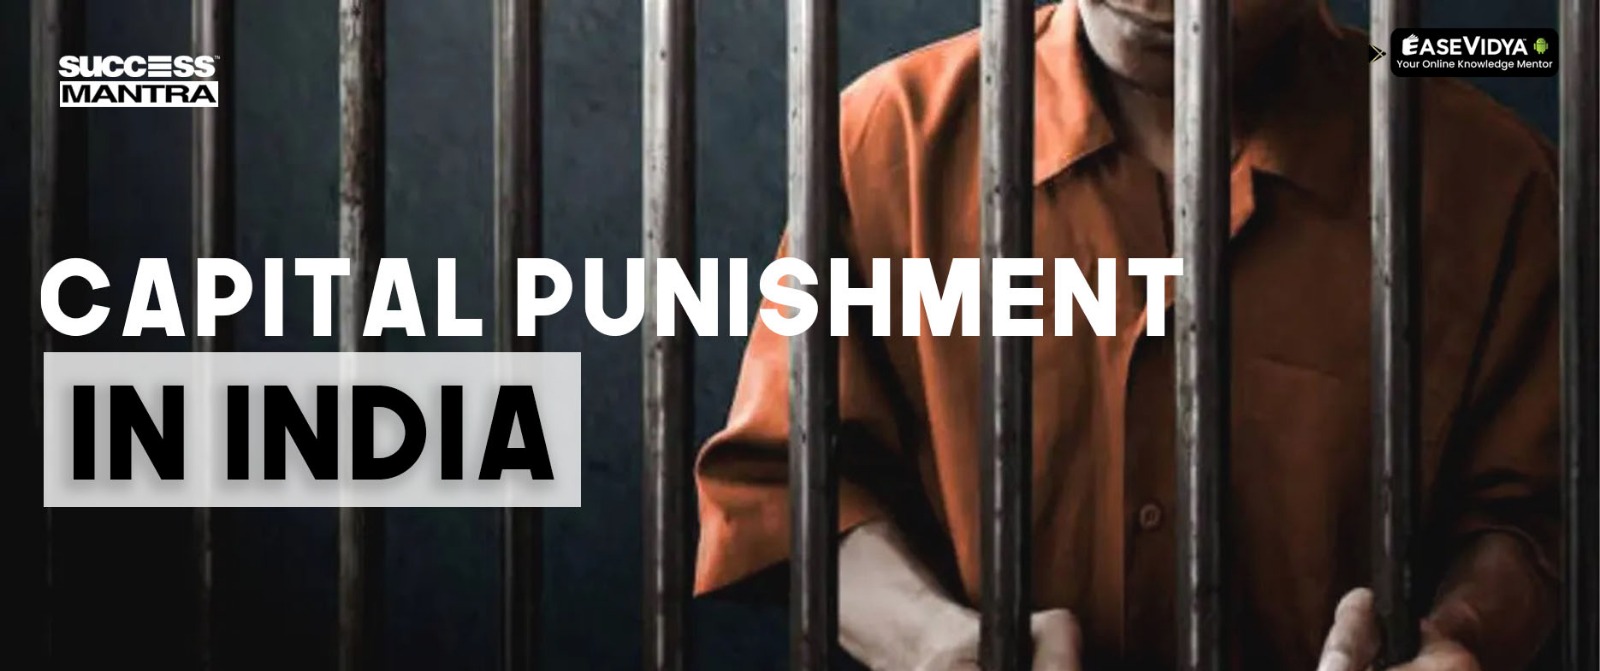 Capital Punishment in India, Capital Punishment, Death Penalty